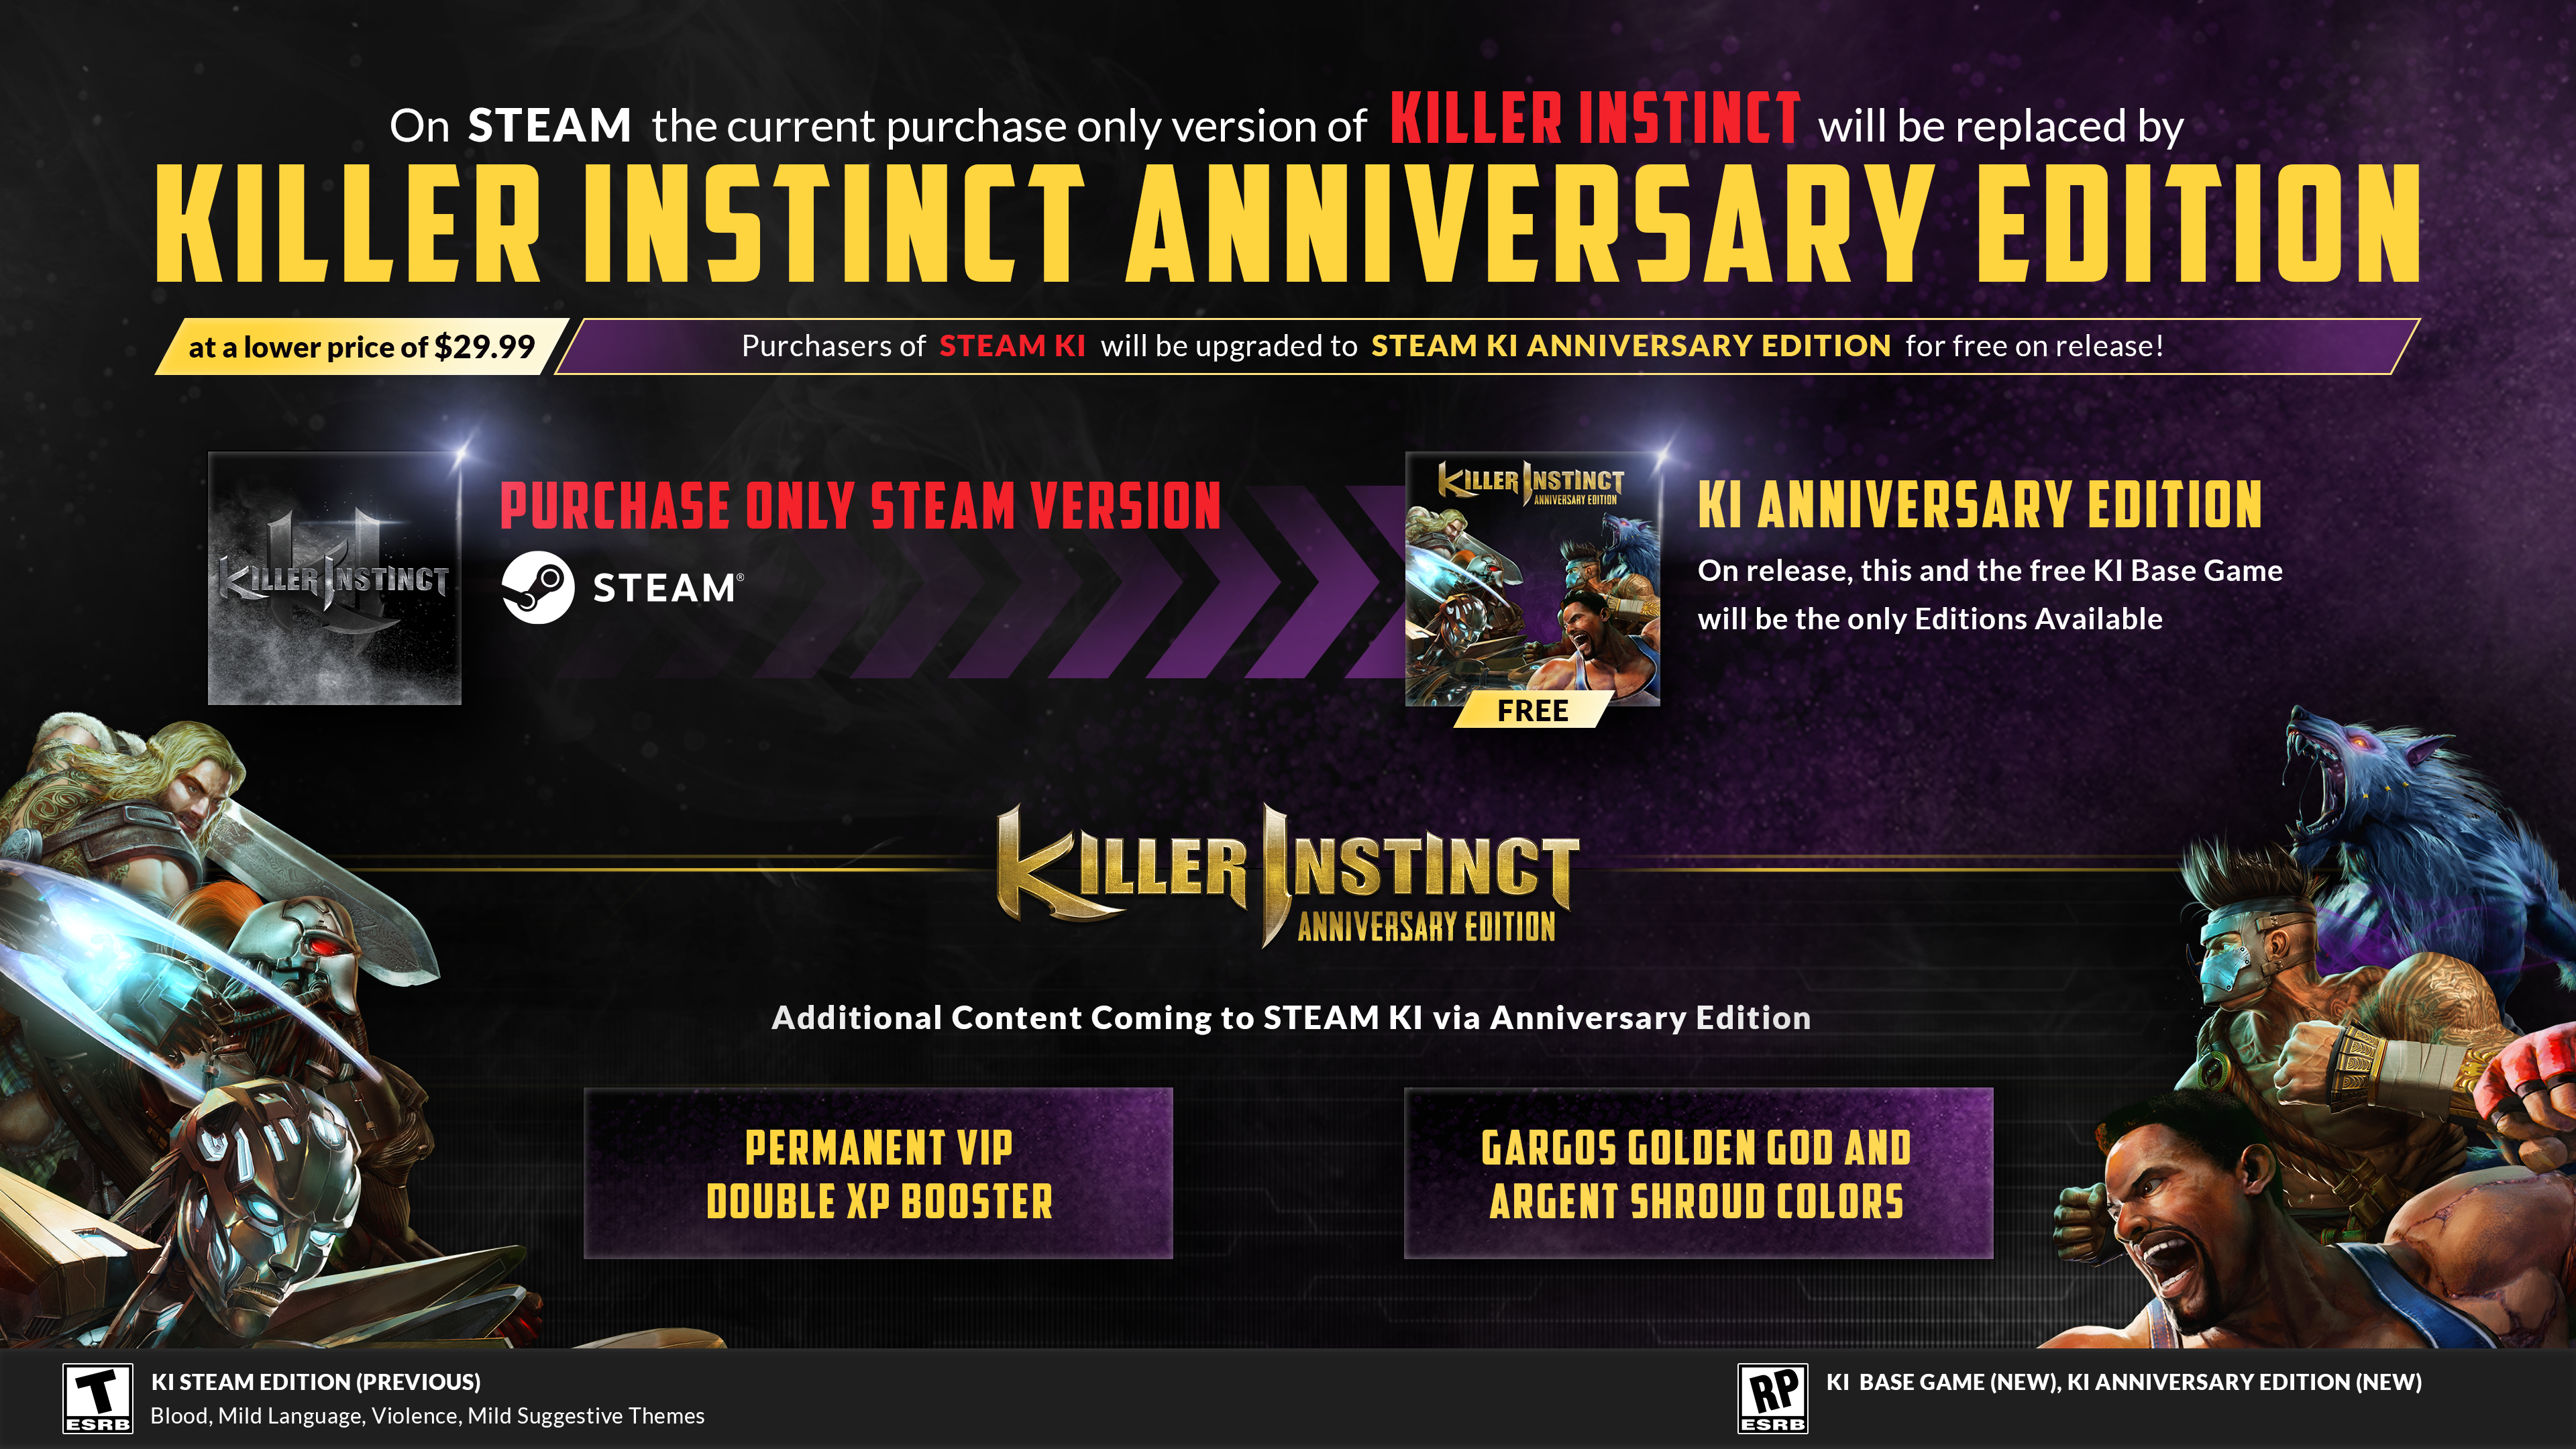 On STEAM the current purchase only version of Killer Instinct will be replaced by Killer Instinct Anniversary Edition at a lower price of $29.99 Purchasers of STEAM KI will be upgraded to Steam KI Anniversary Edition for free on release! Purchase only Steam version >>> KI Anniversary Edition ($29.99) On release, this and the free KI Base Game will be the only Editions available Additional Content Coming to Steam KI via Anniversary Edition: Permanent VIP Double XP Booster Gargos Golden God and Argent Shroud colors ESRB Rated T for Teen: KI Steam Edition (PREVIOUS); Blood, Mild Language, Violence, Mild Suggestive Themes ESRB Rated RP for Rating Pending, Steam: KI Base Game (NEW), KI Anniversary Edition (NEW)